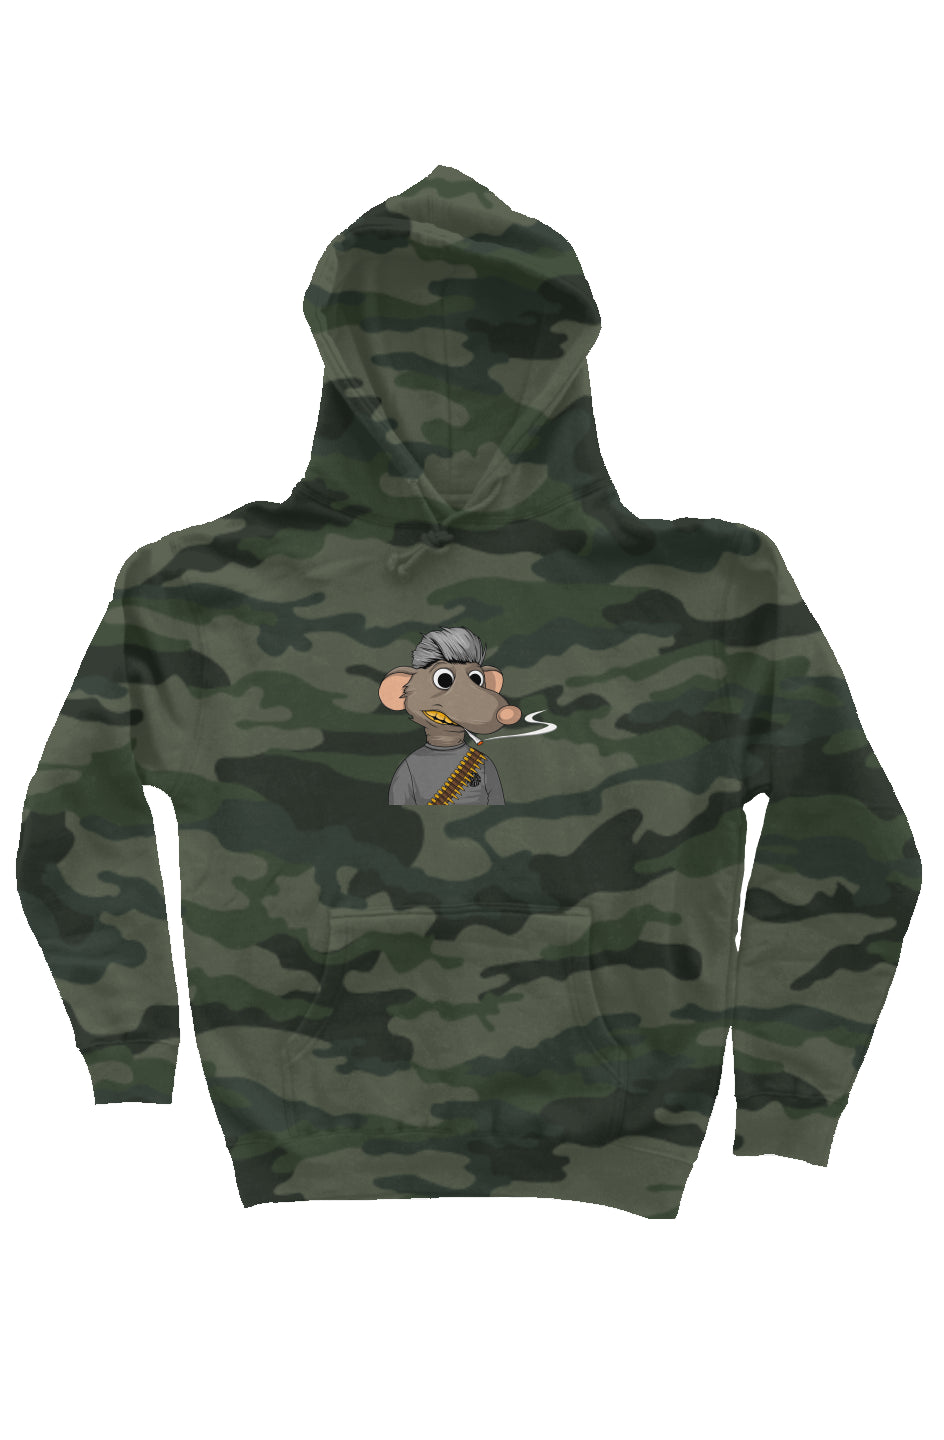 Camo Independent Heavyweight Hoodie feat Fat Rat #7013